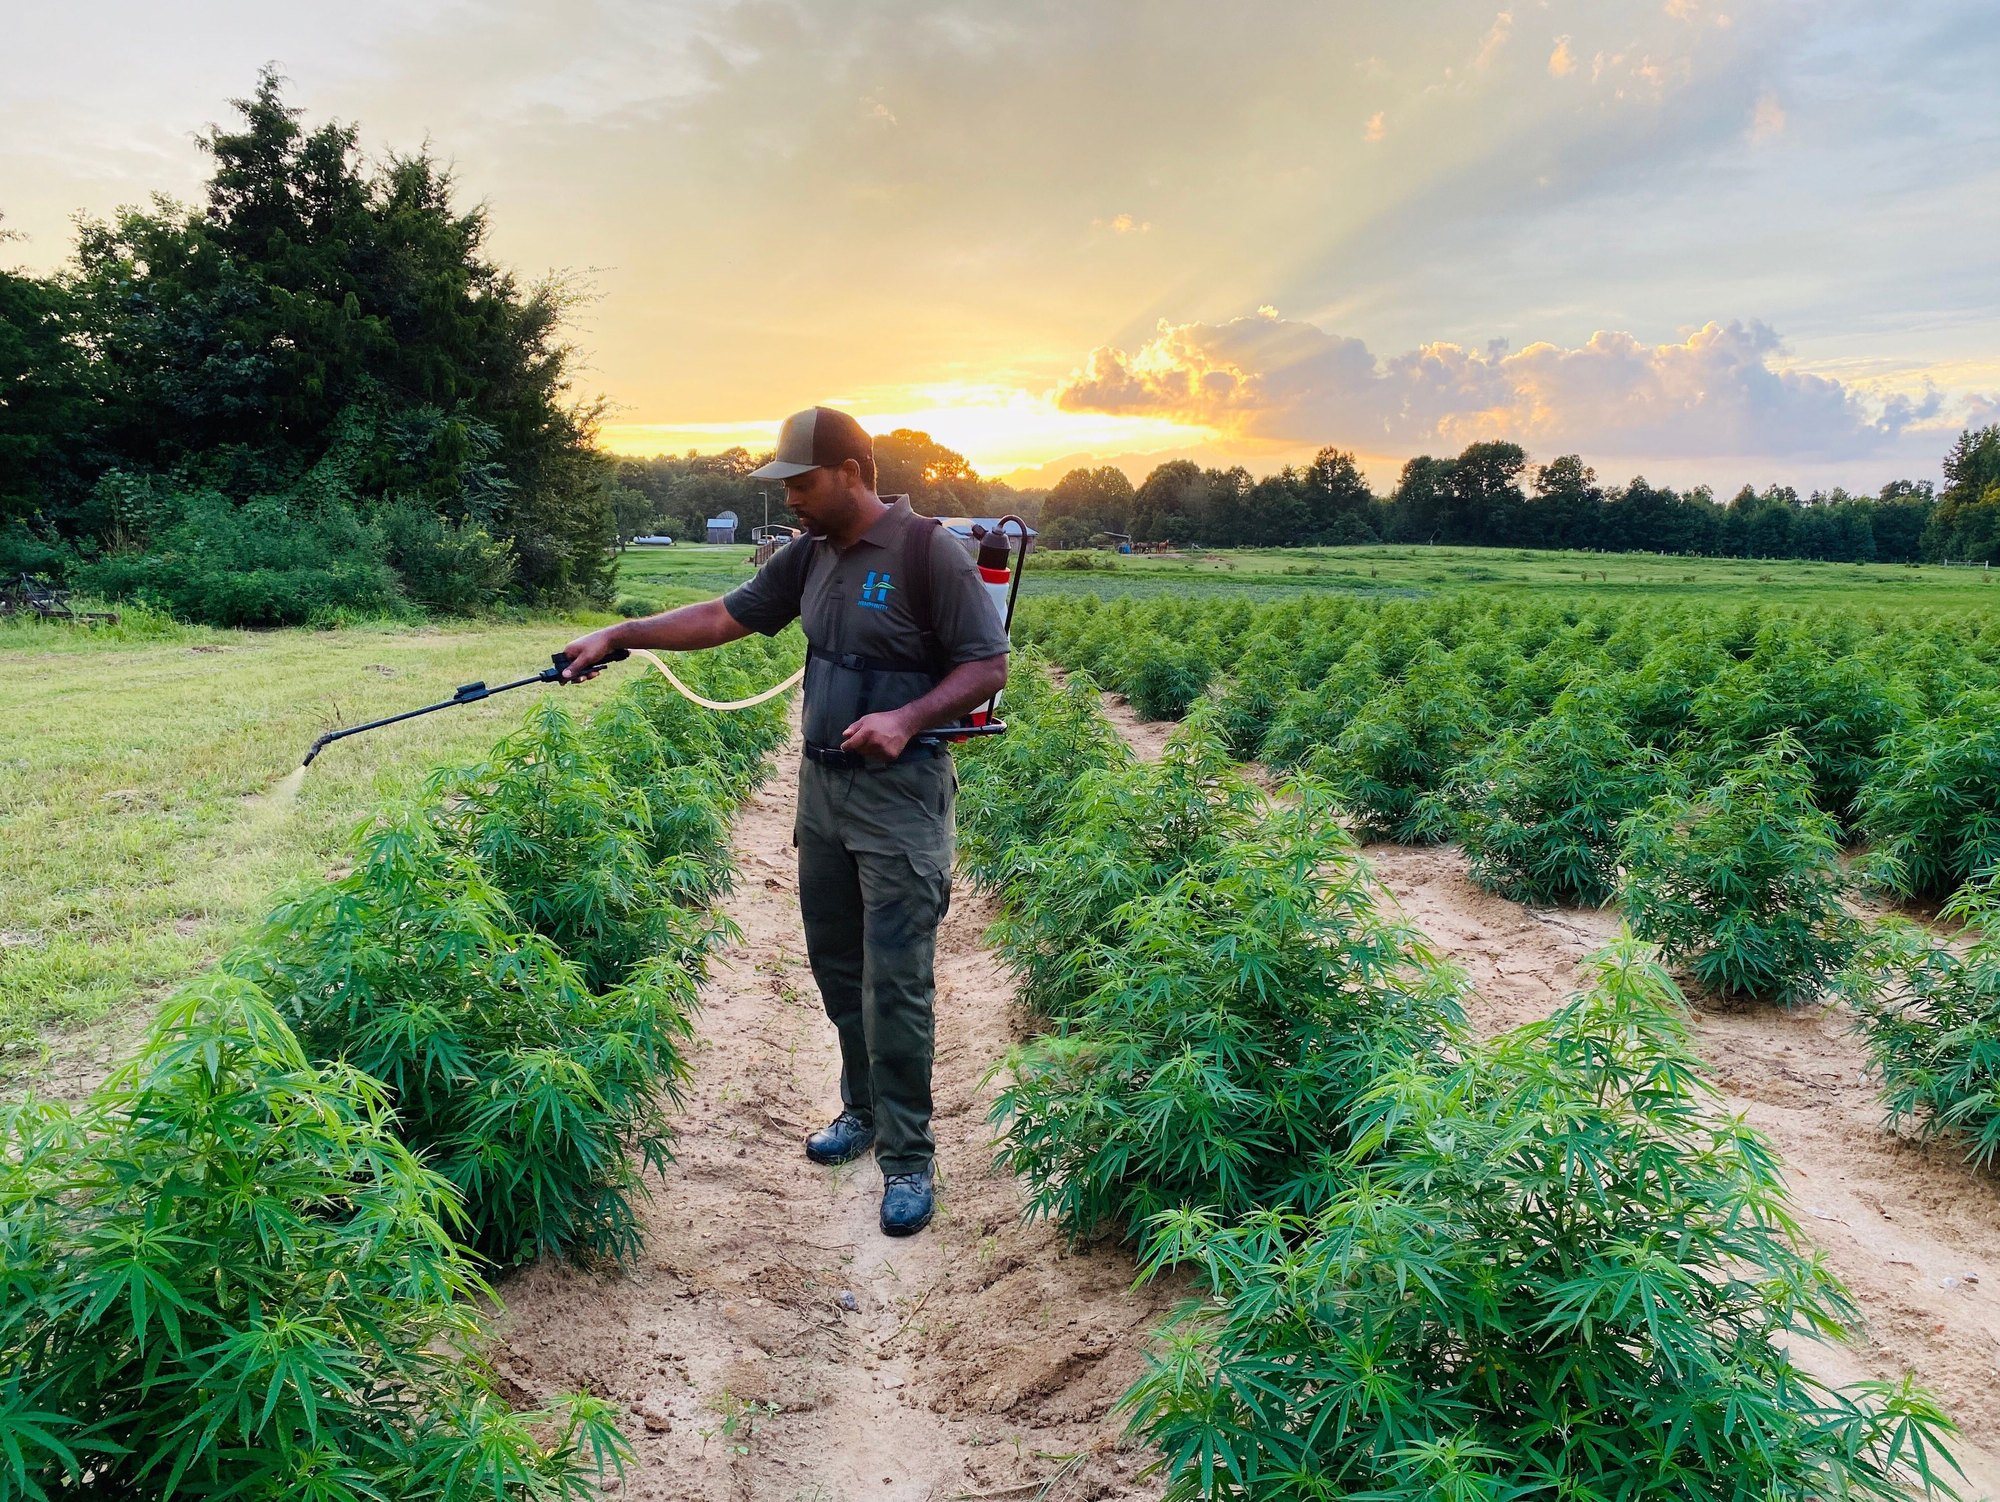 Patrick Brown at Brown Family Farms in North Carolina spraying pesticides on hemp plants. September 2021